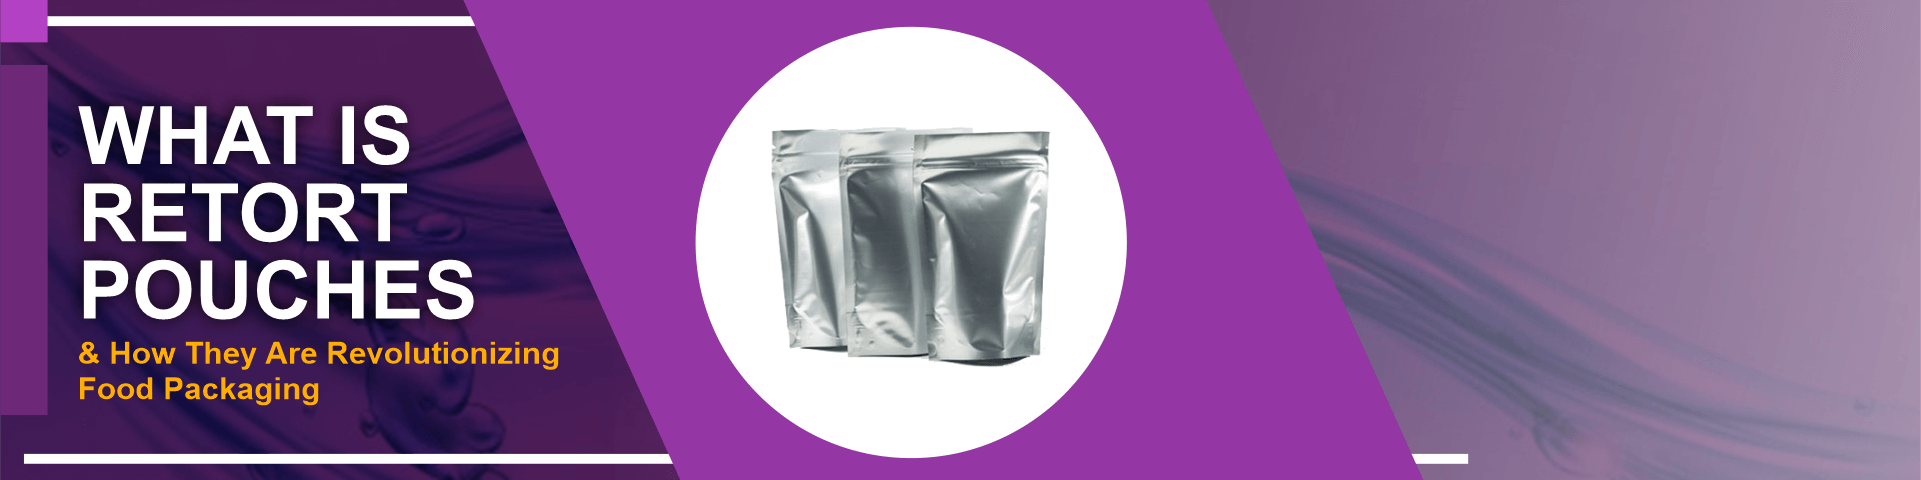 What Is Retort Pouches and How They Are Revolutionizing Food Packaging